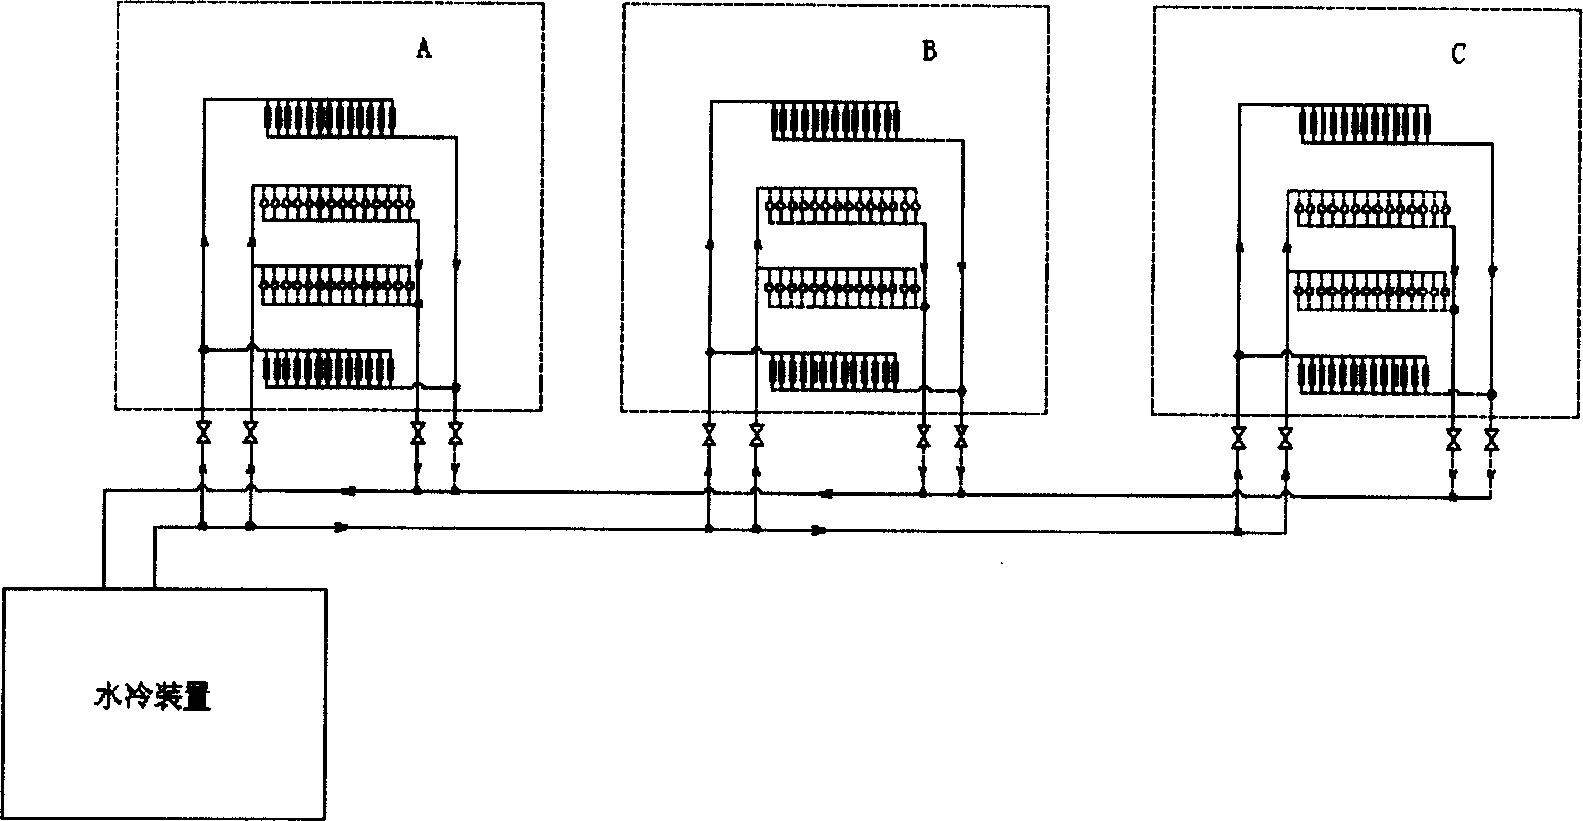 Water delivery and distribution pipeline system of standing reactive compensator thyristor velve set